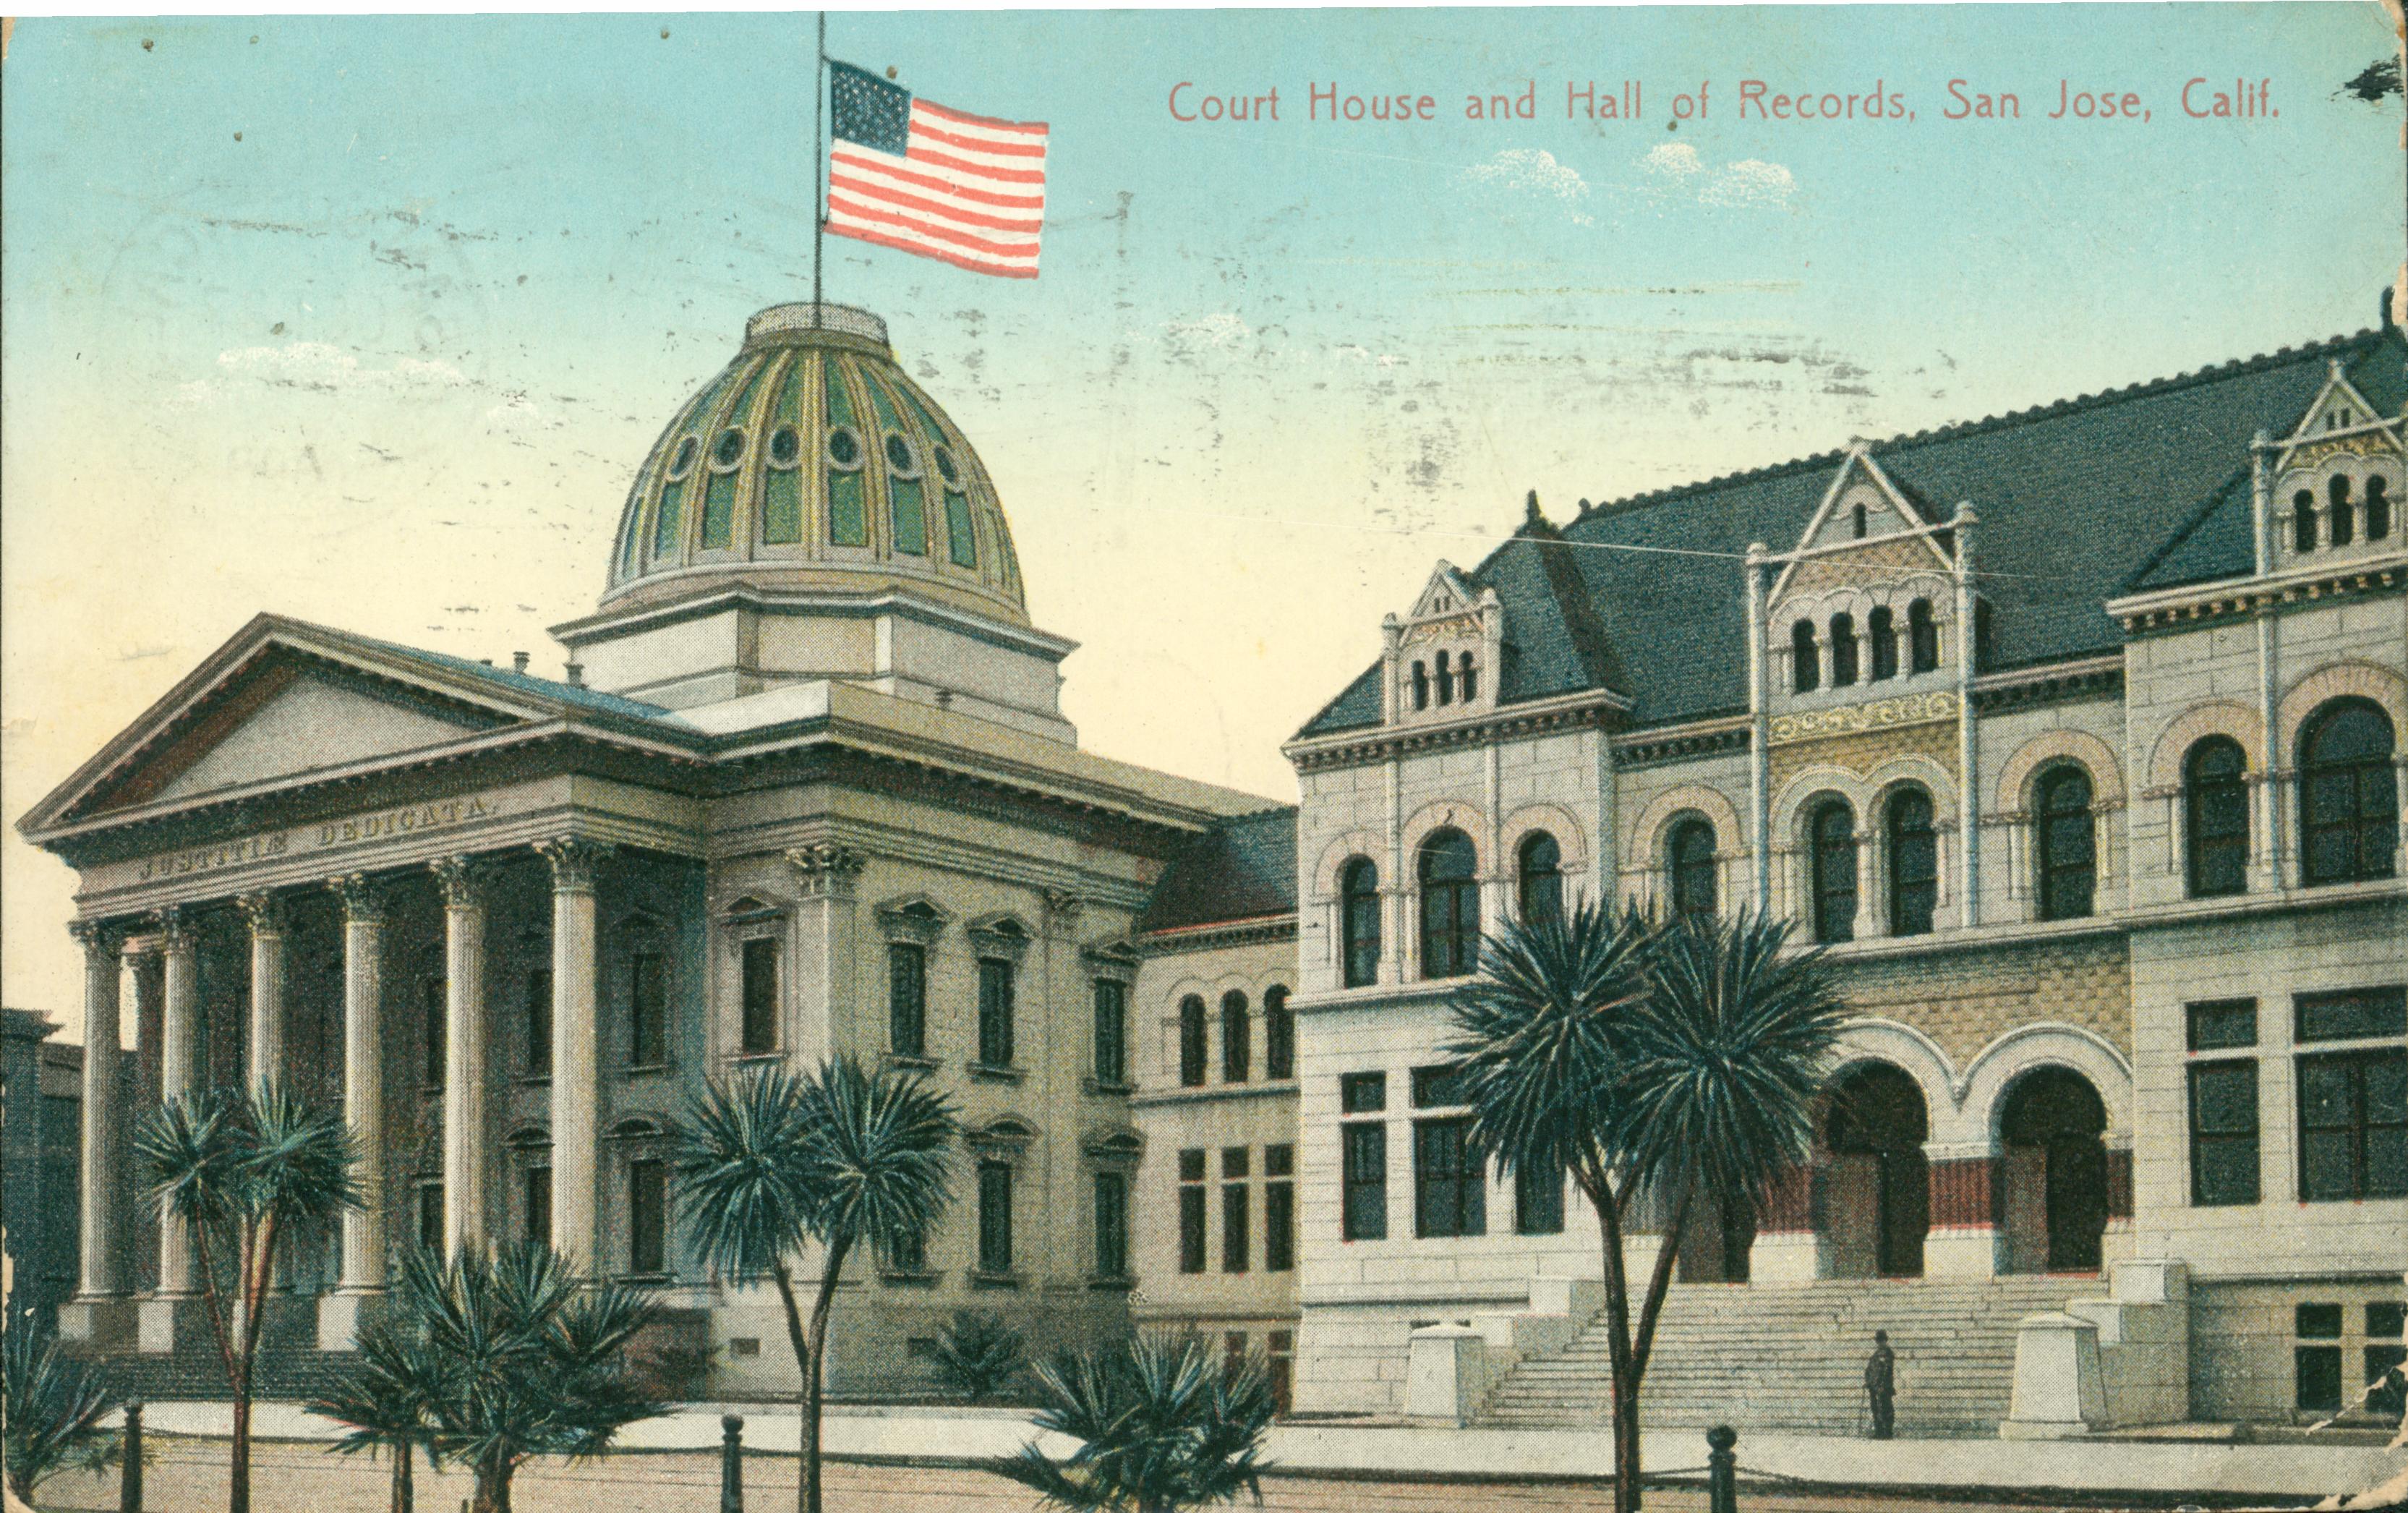 Exterior view of Court House and Hall of Records, palm trees and American flag